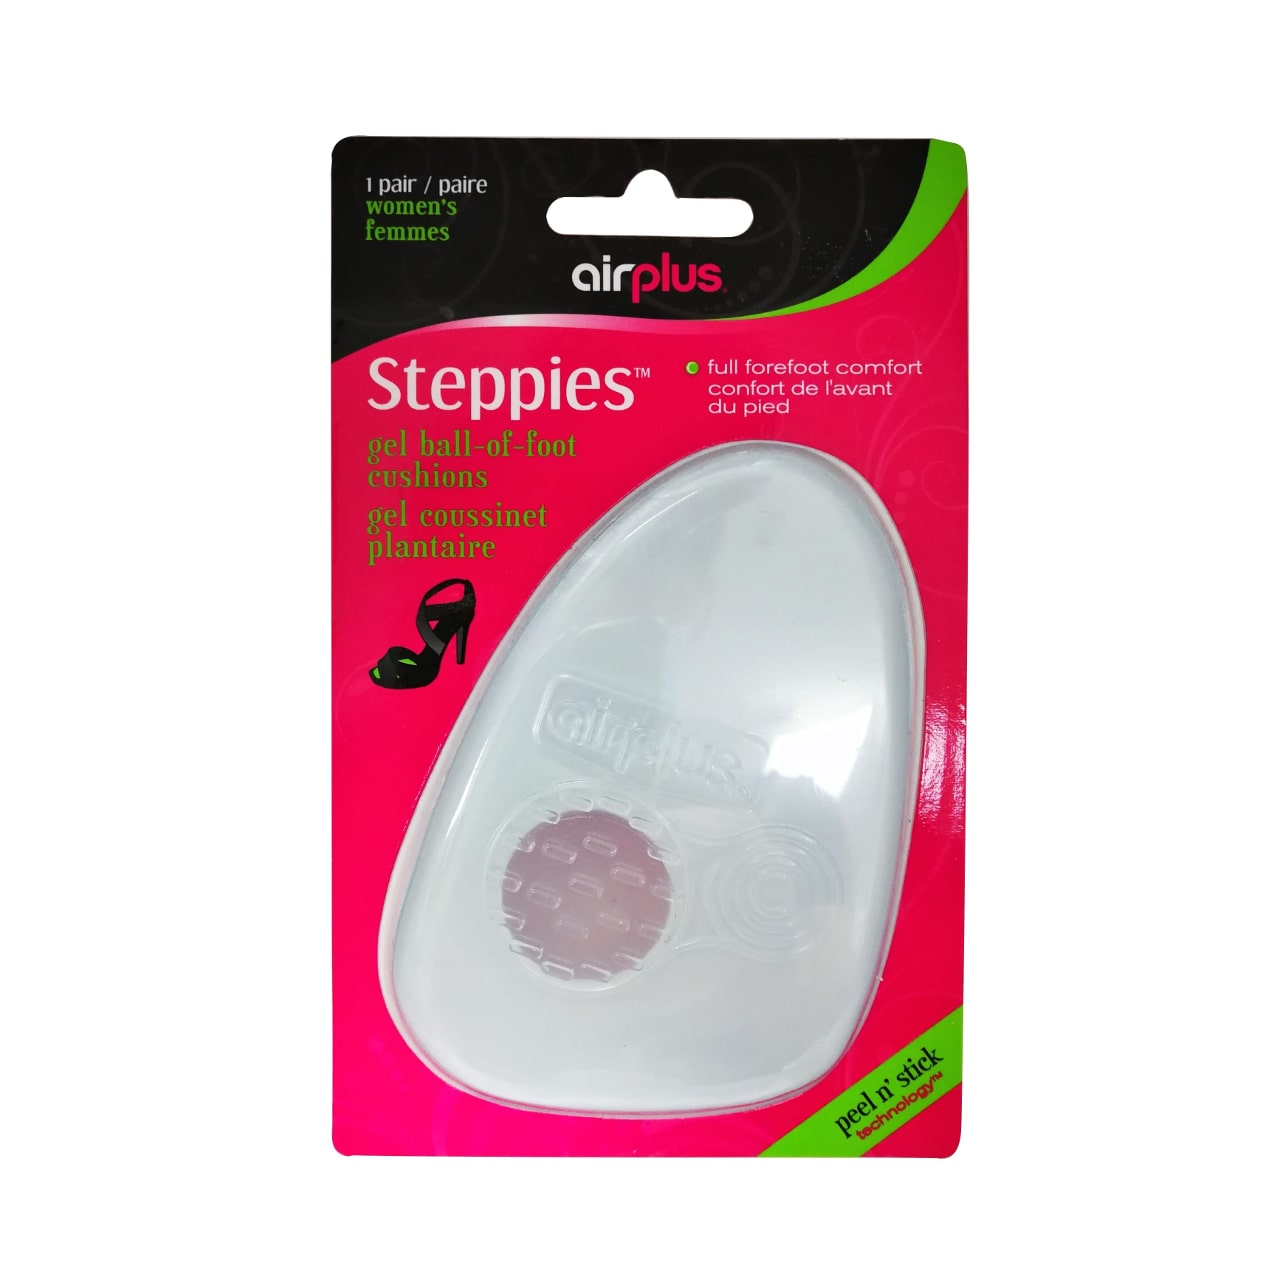 Product packaging for Airplus Steppies Ball-of-Foot Cushions in English and French